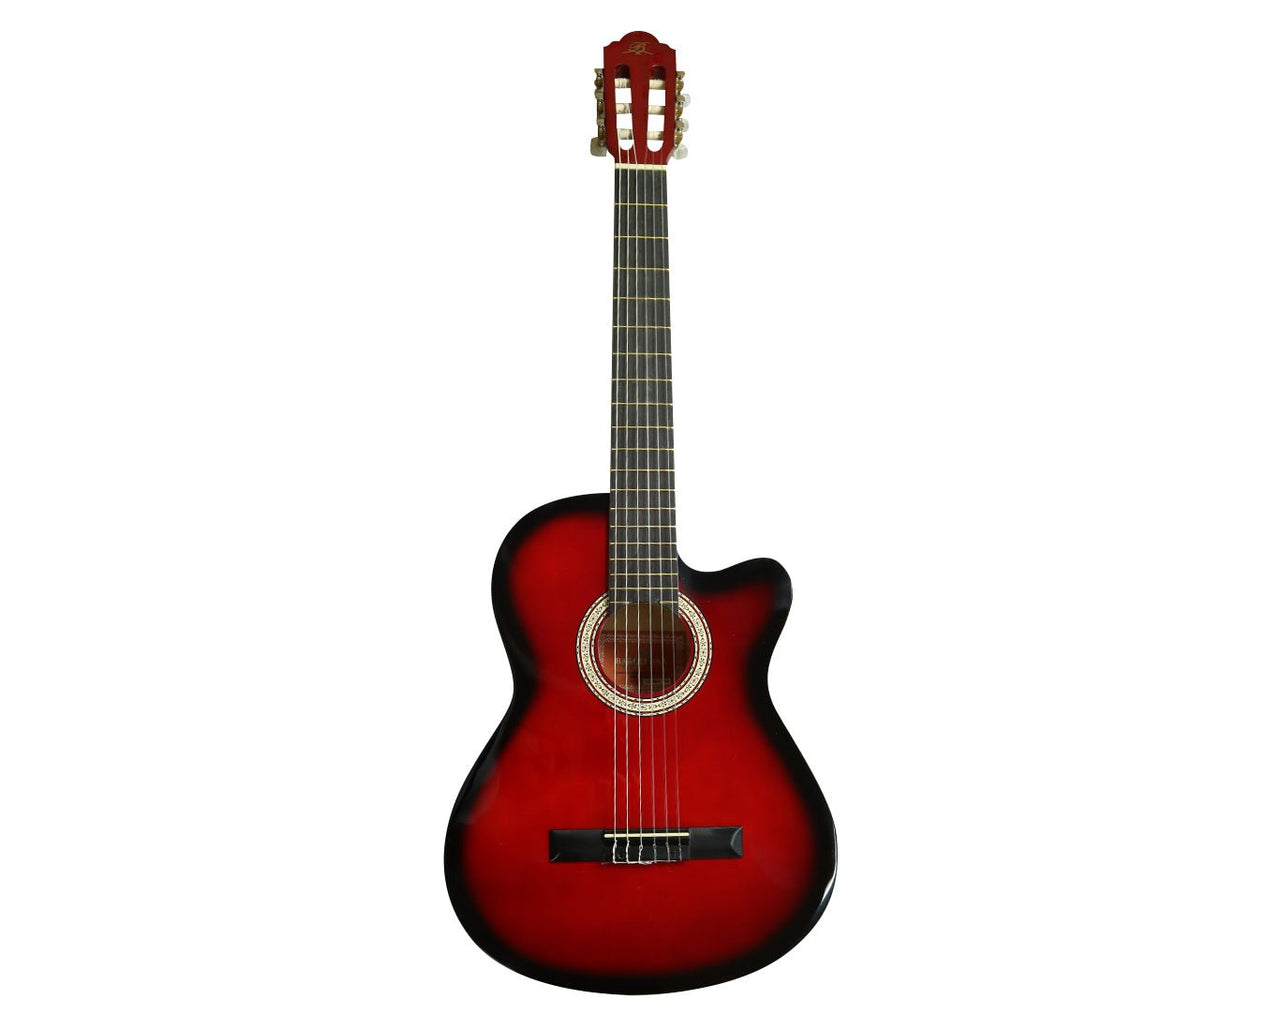 39" Classic Acoustic Guitar Cutaway Nylon Strings Red LC-3900C-RDS